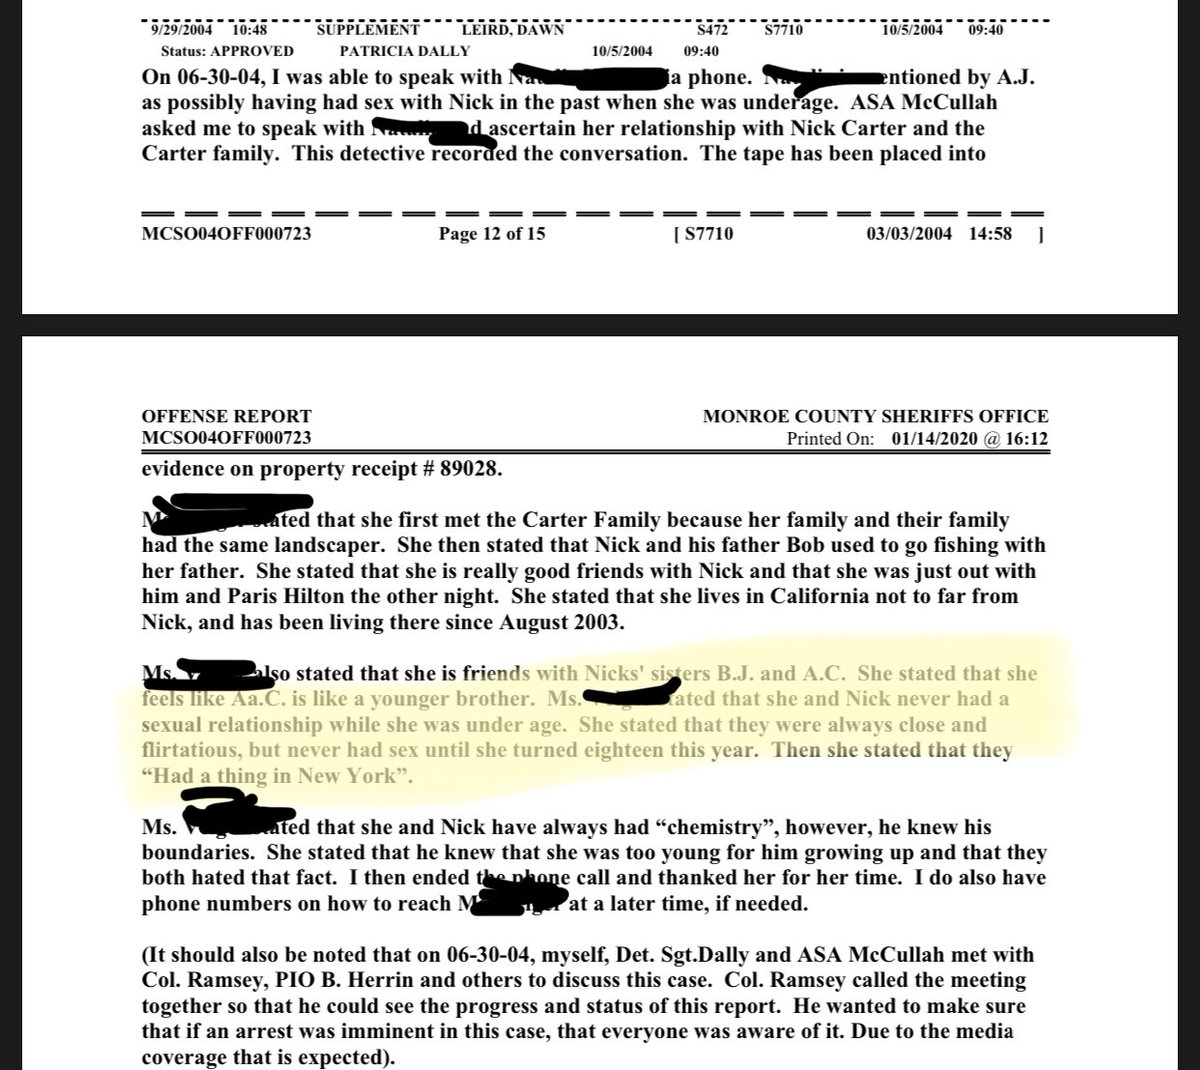 The next tweets in the thread will be the parts of the police report that we highlighted above.